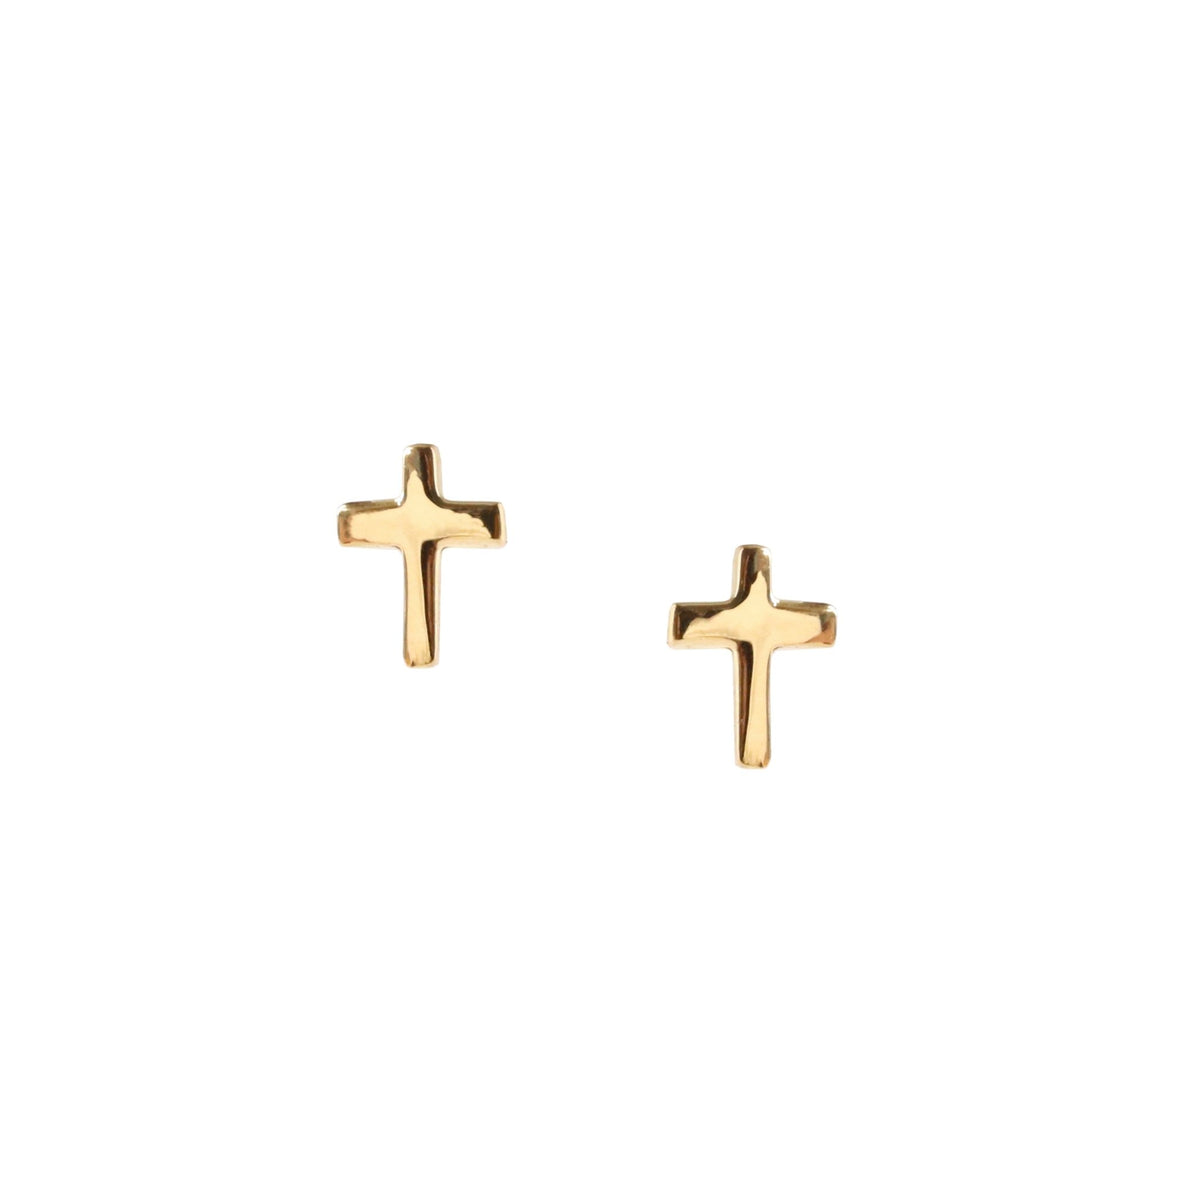 TINY POISE CROSS STUDS - GOLD - SO PRETTY CARA COTTER